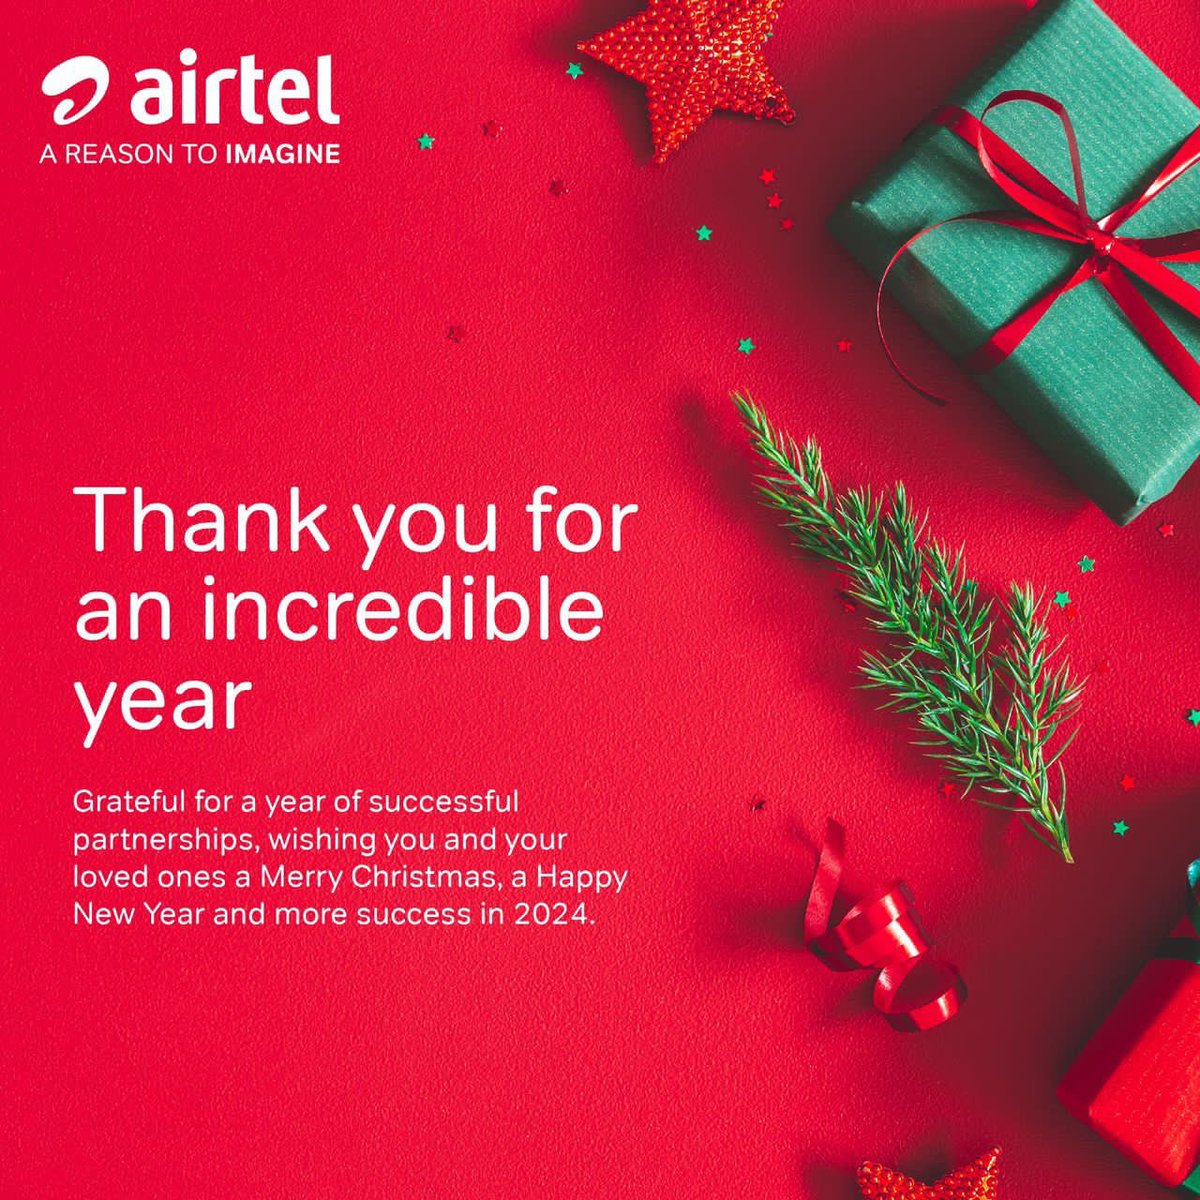 Merry Xtmas to you all the beloved  airtel users #AReasonToImagine